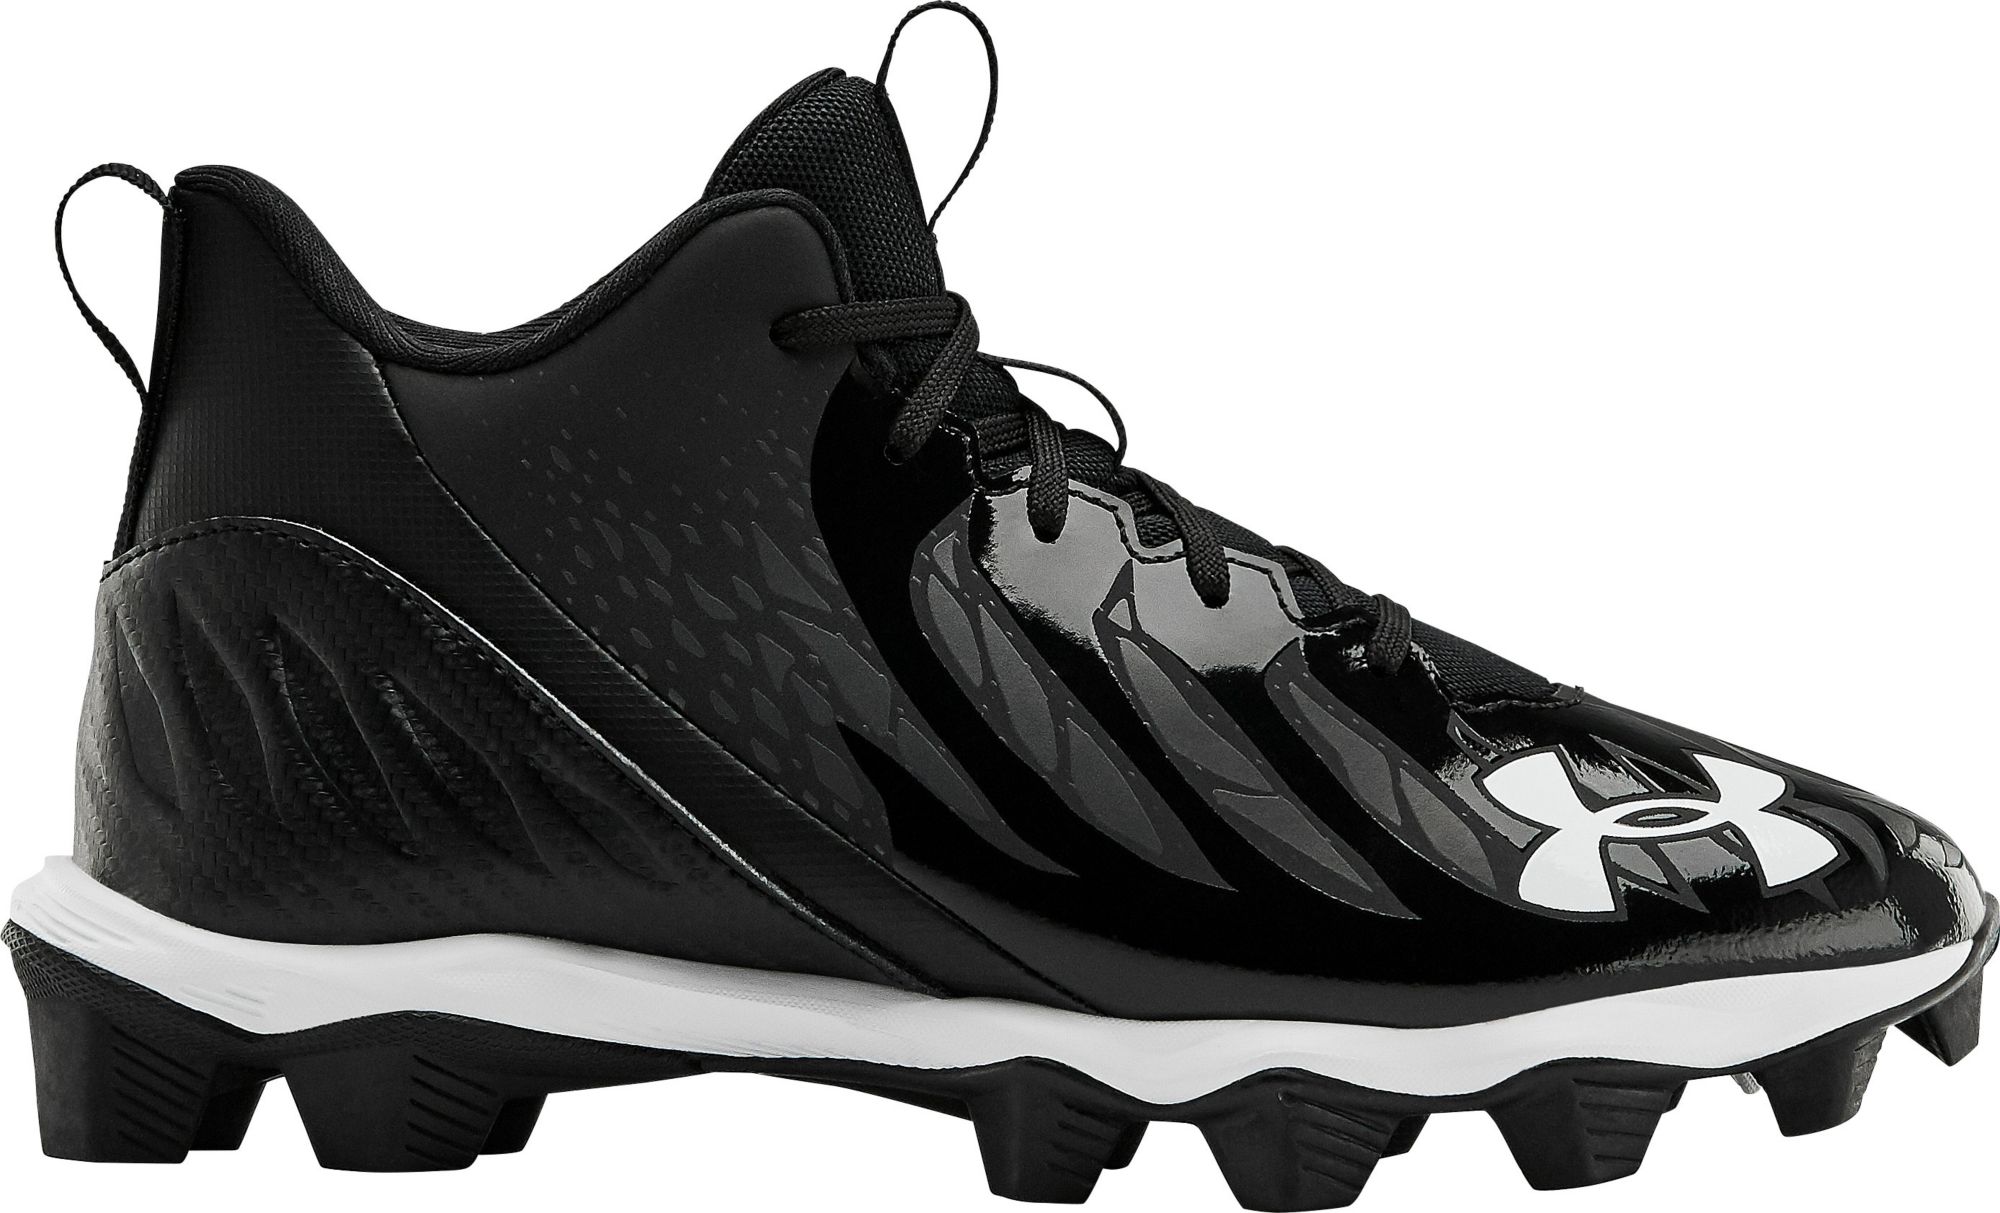 big 5 football cleats youth